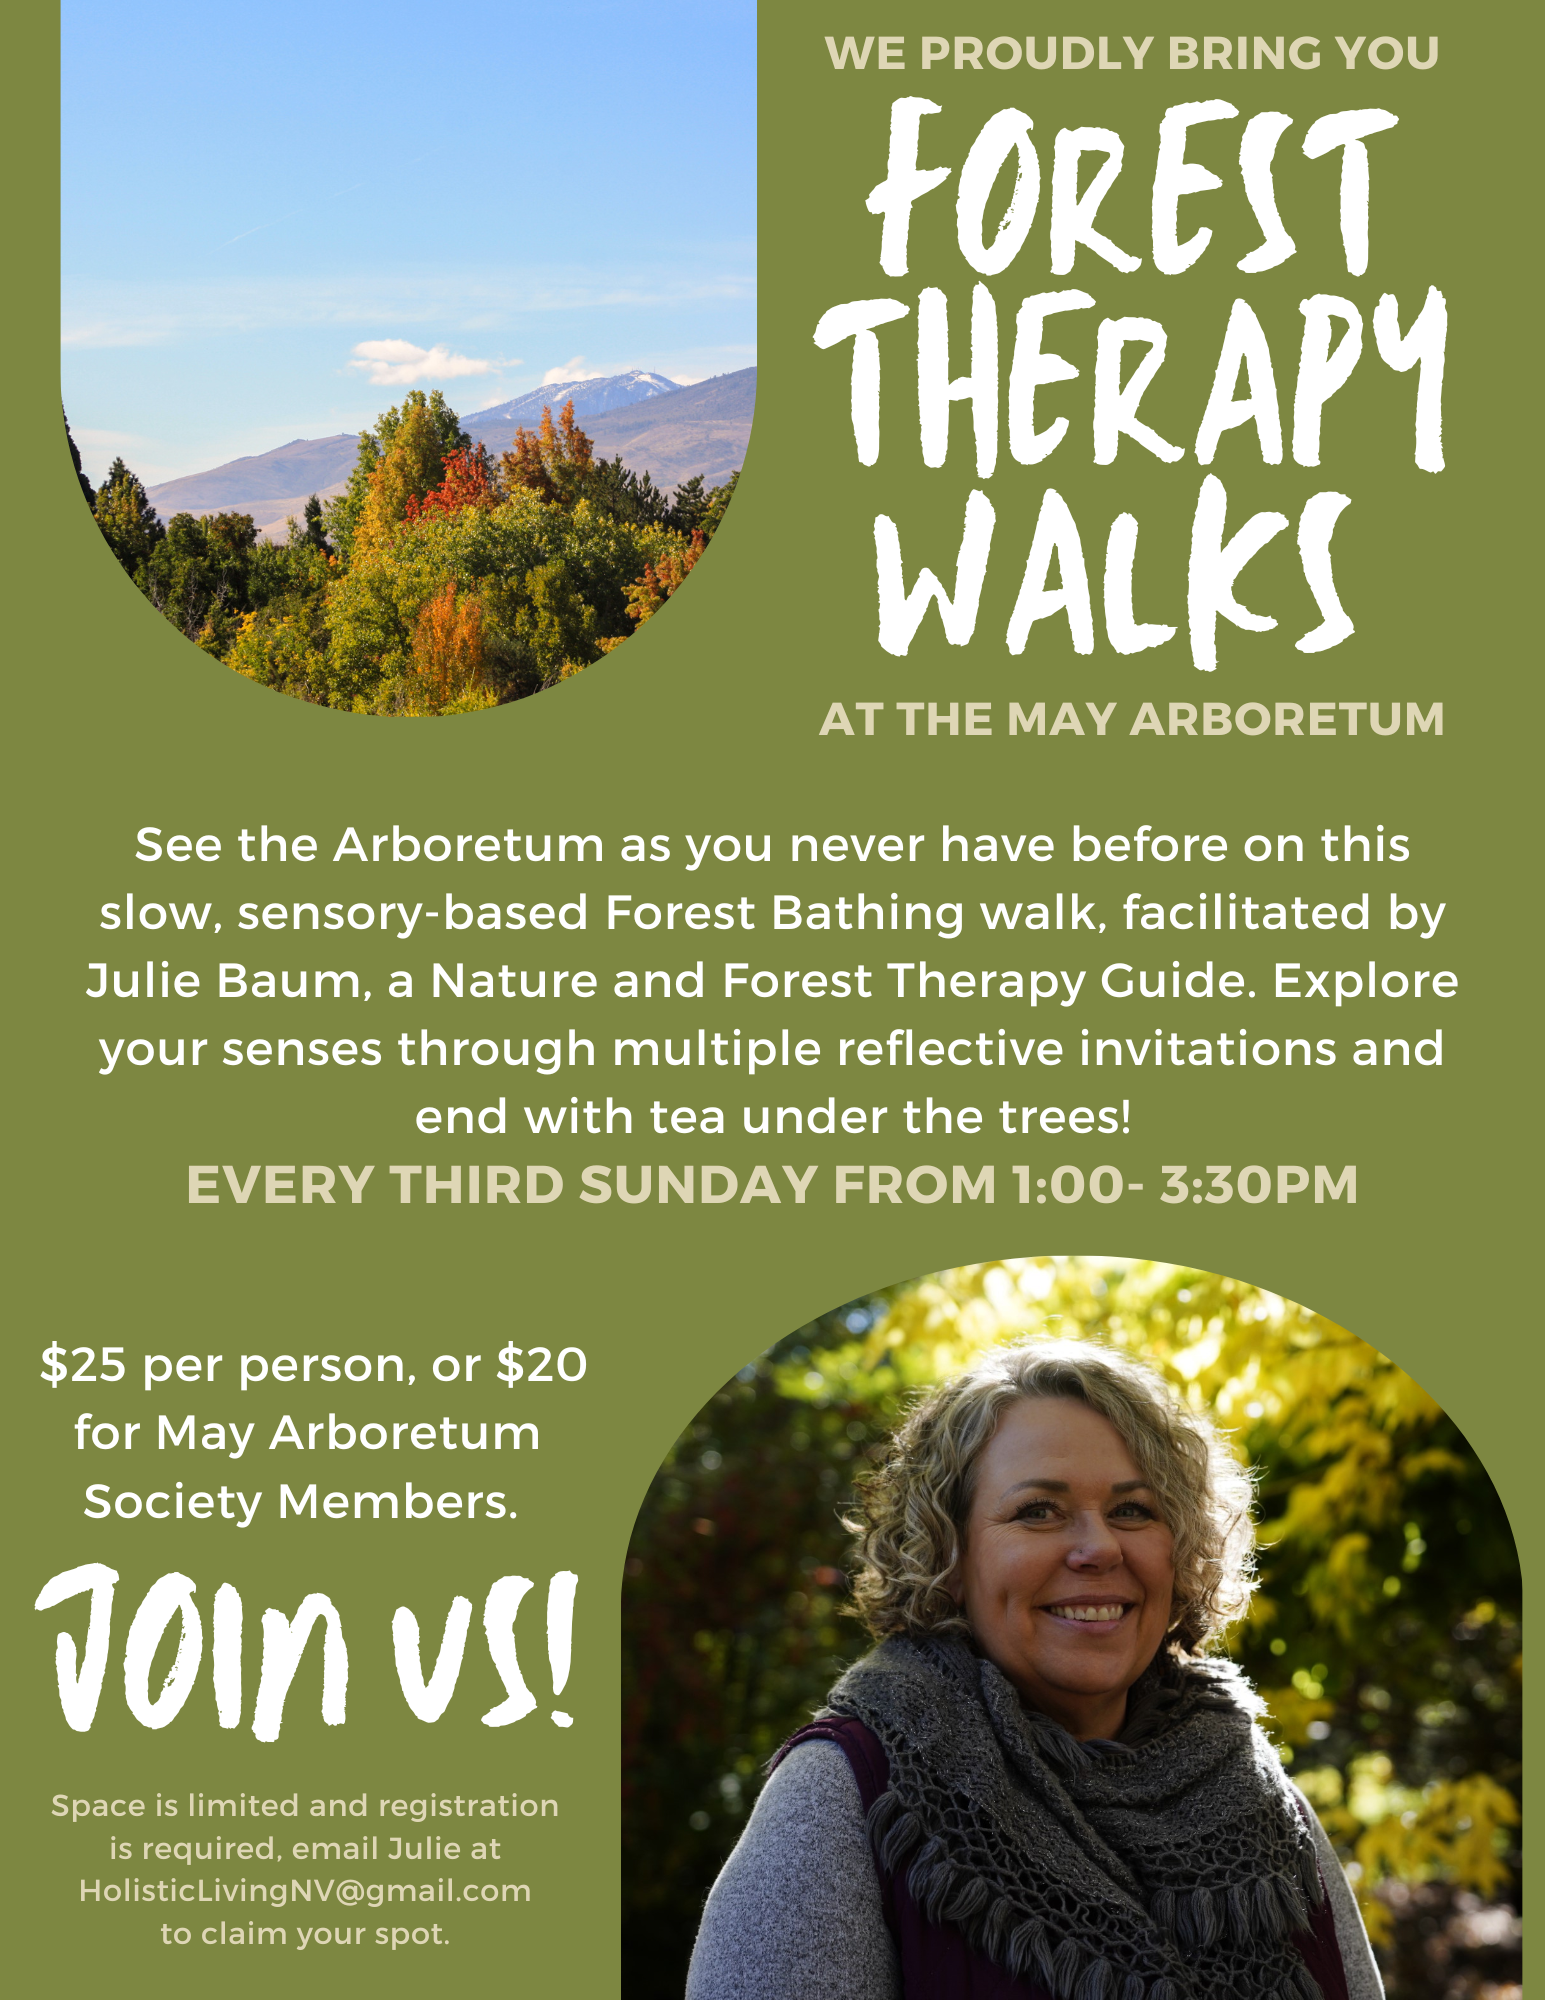 Winter-Forest-Therapy-Walks-Flyer-2.png